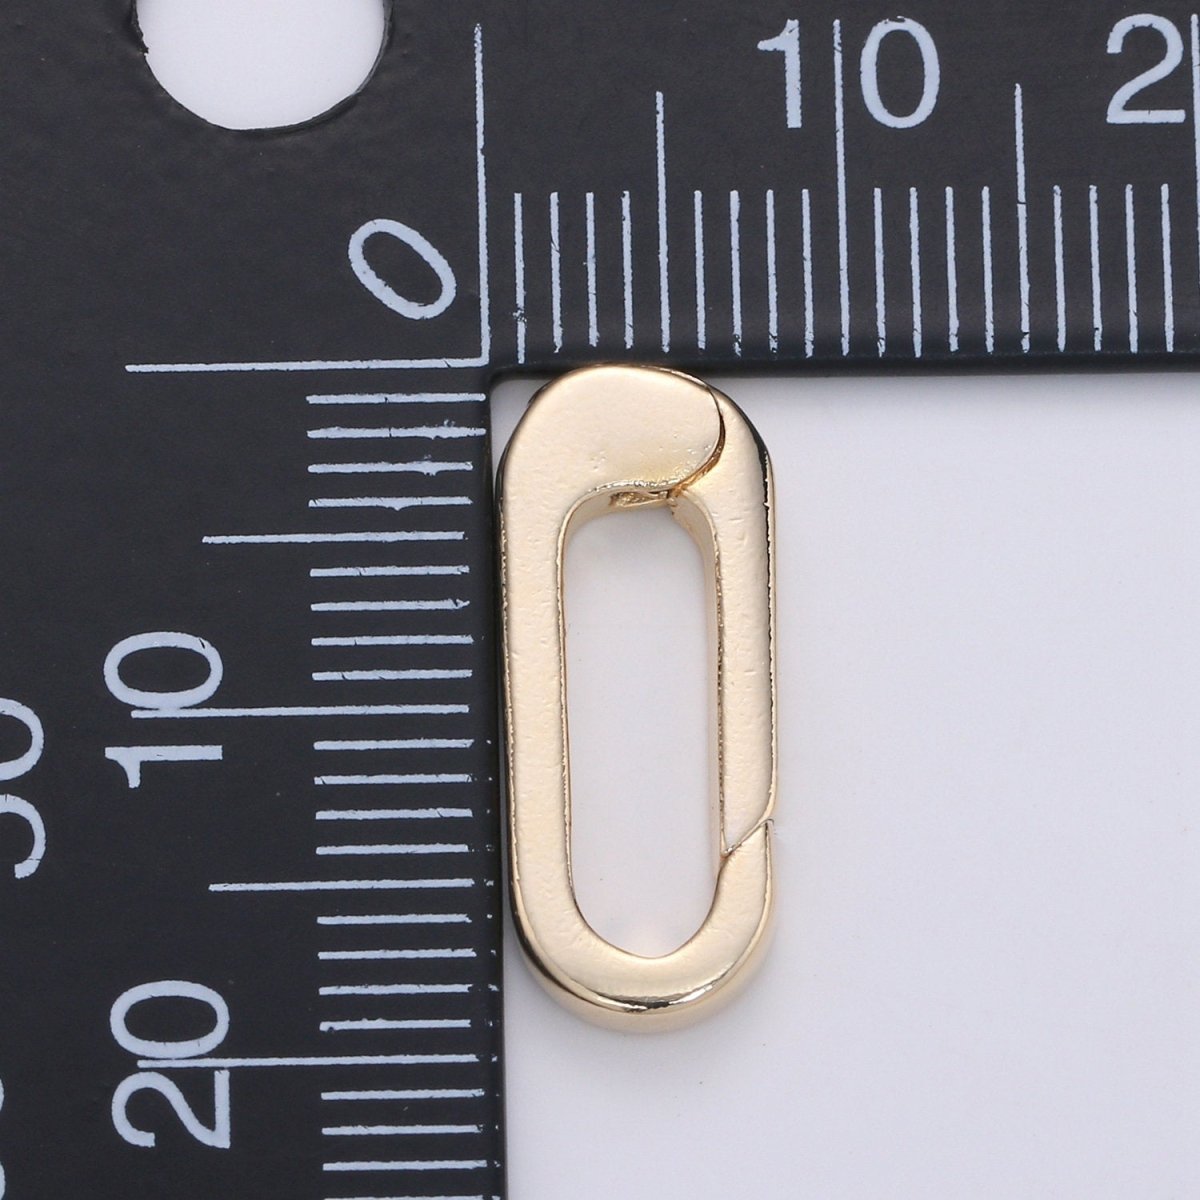 Gold Small Push Gate Oval Clasp, Spring gate Clasp, 19x8mm WHOLESALE Supply L-006 - DLUXCA